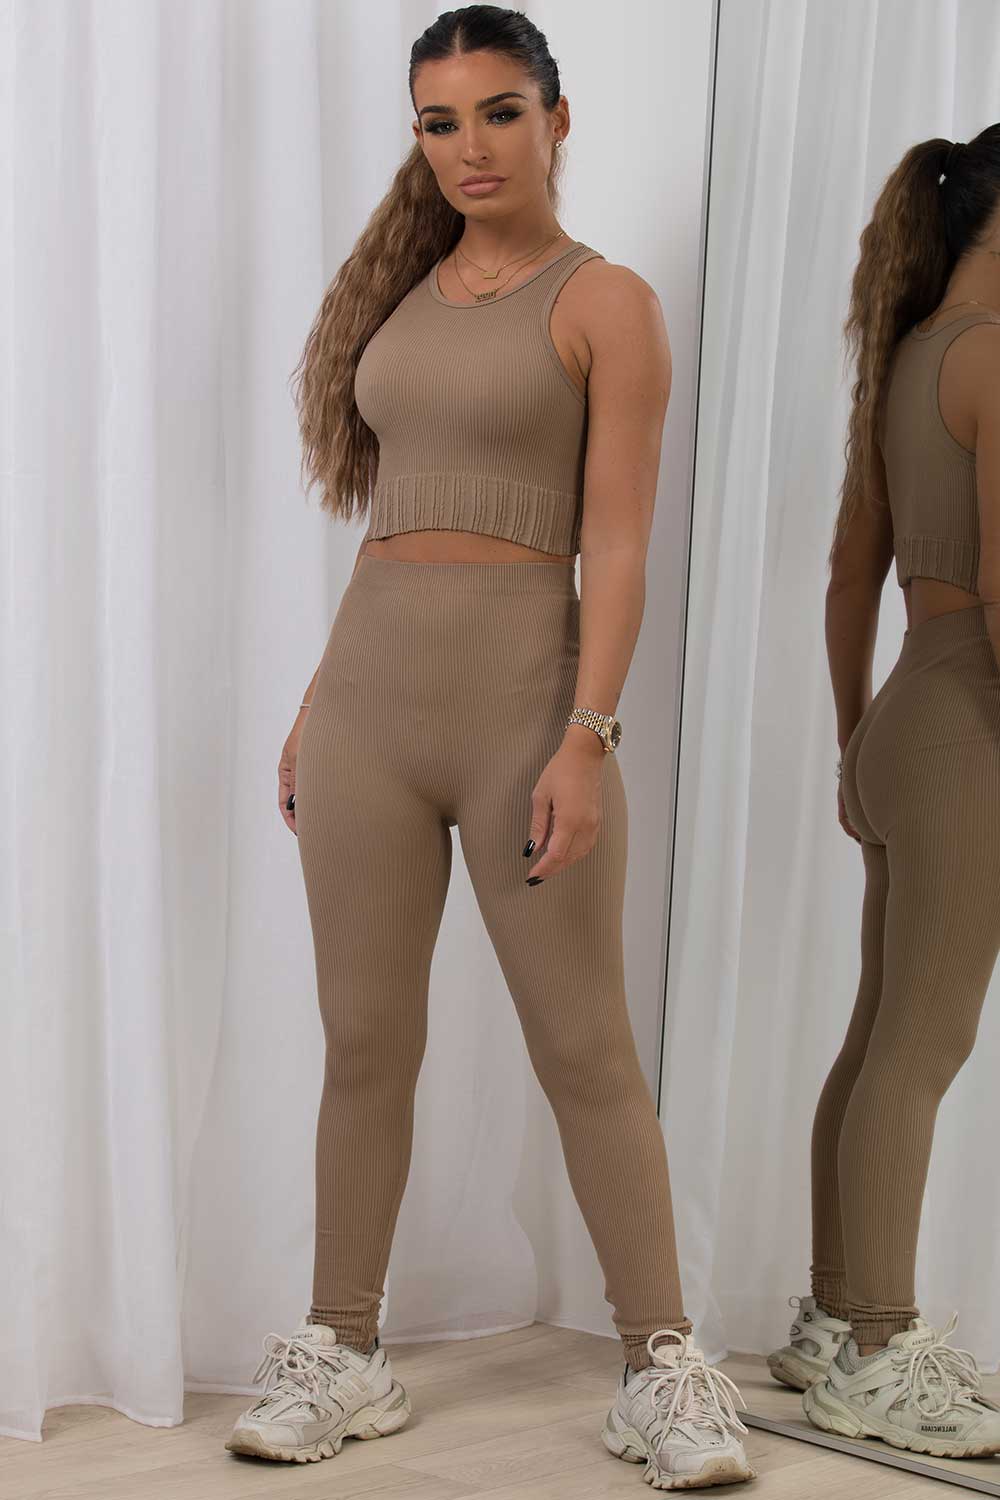 Ribbed Top and Leggings Gym Set - Buy Fashion Wholesale in The UK